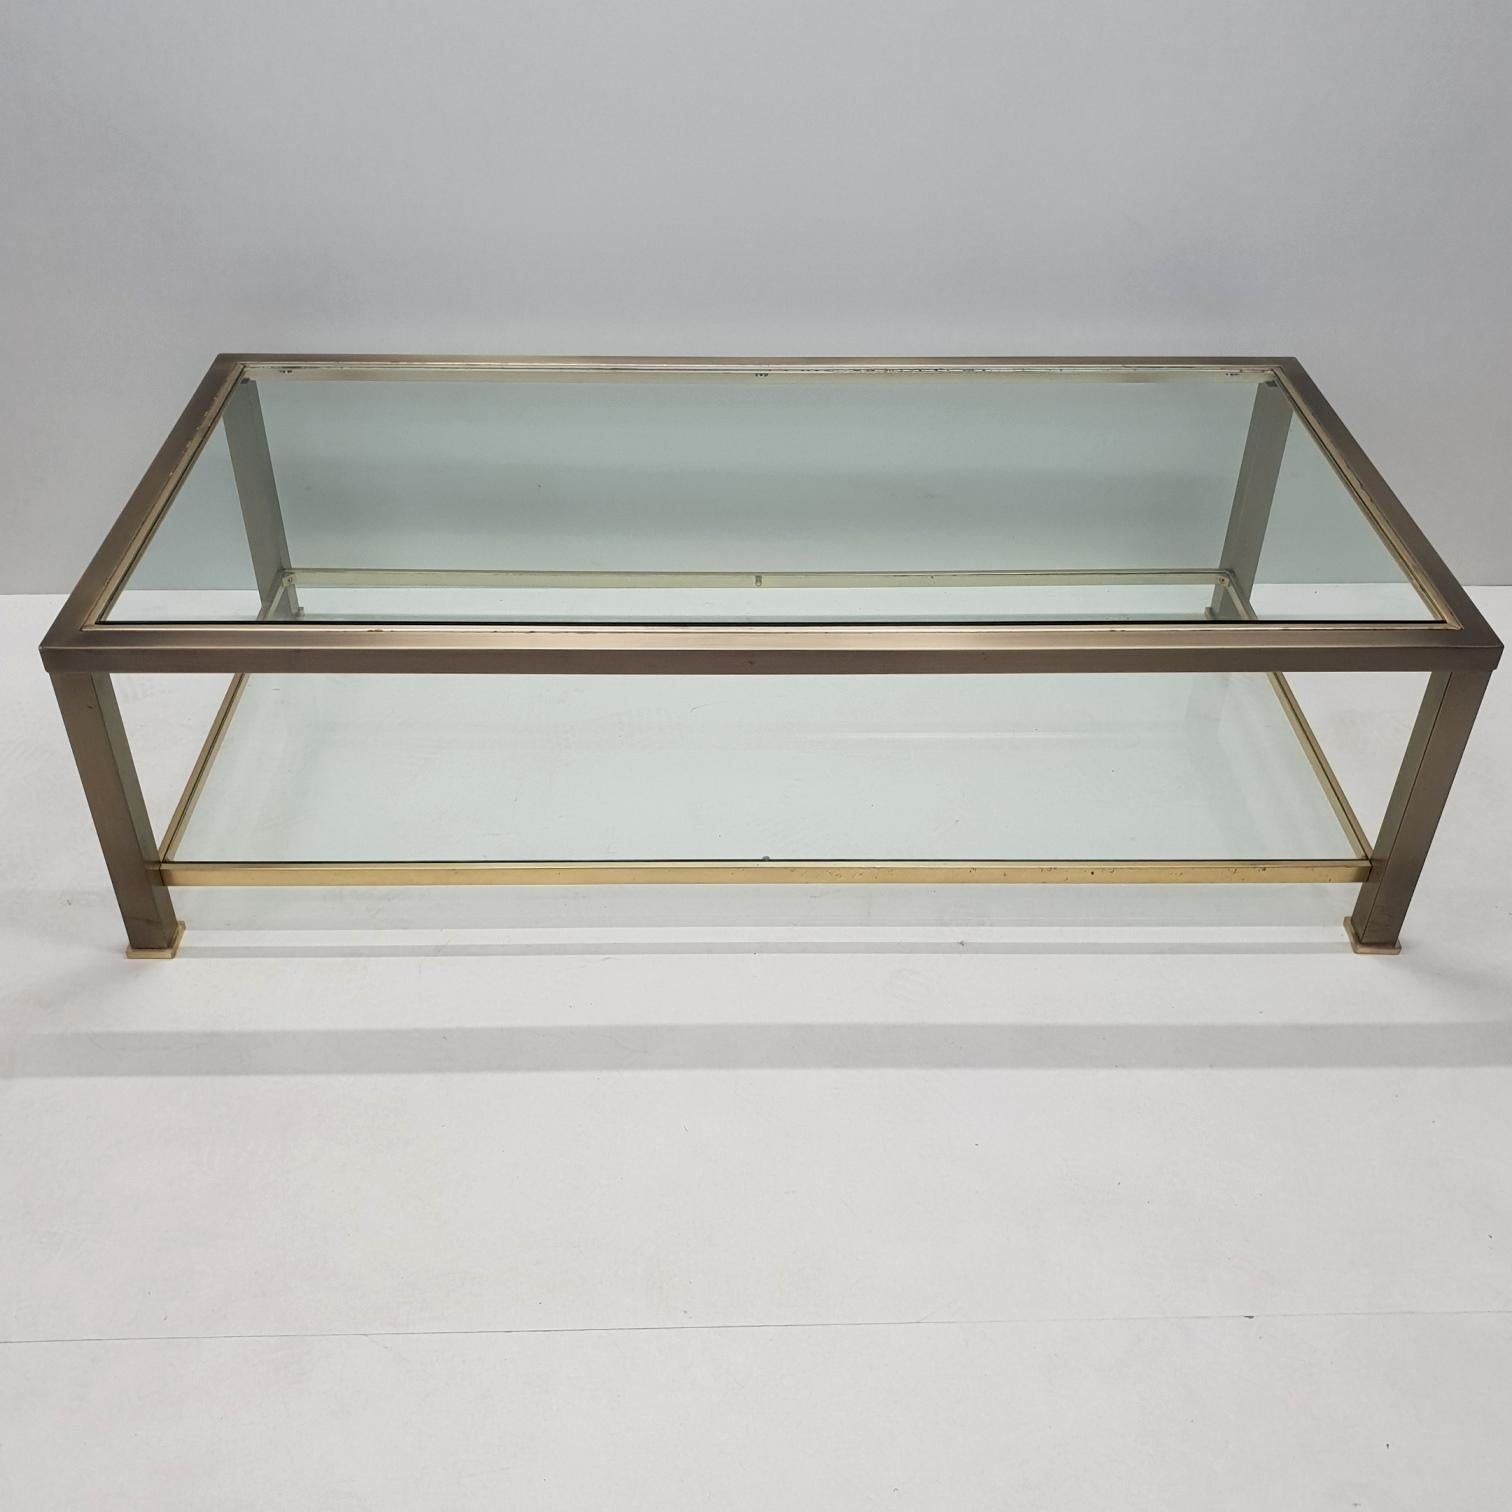 Belgian Brass 2-Tiers Coffee Table with Cut Glass from Belgo Chrom, 1980s For Sale